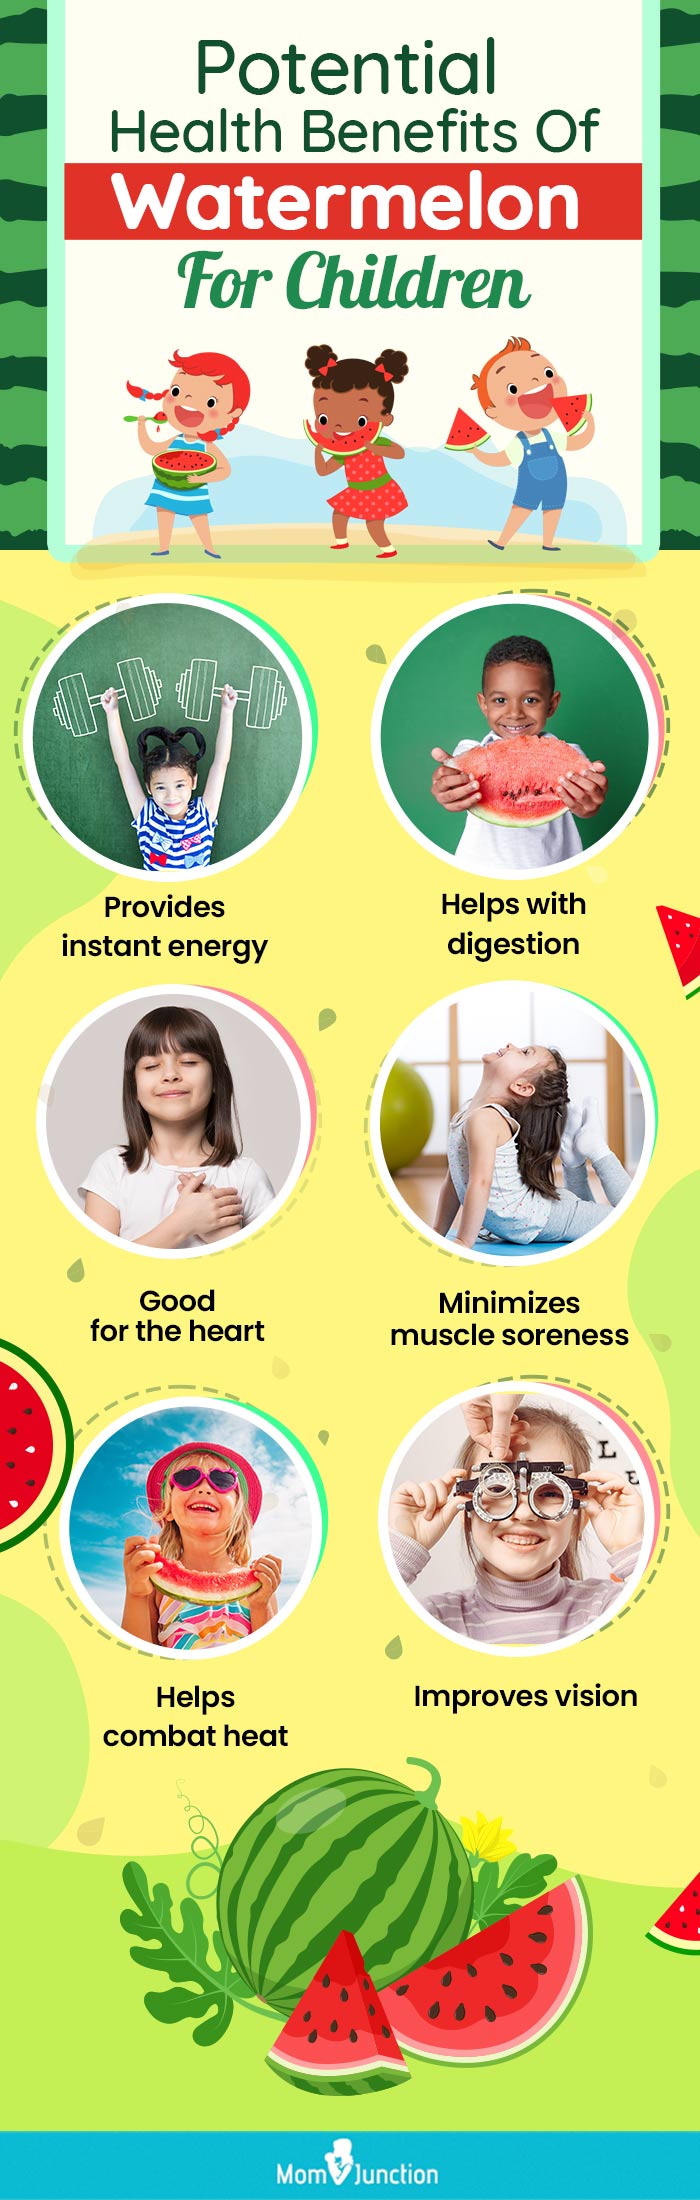 potential health benefits of watermelon for children (infographic)